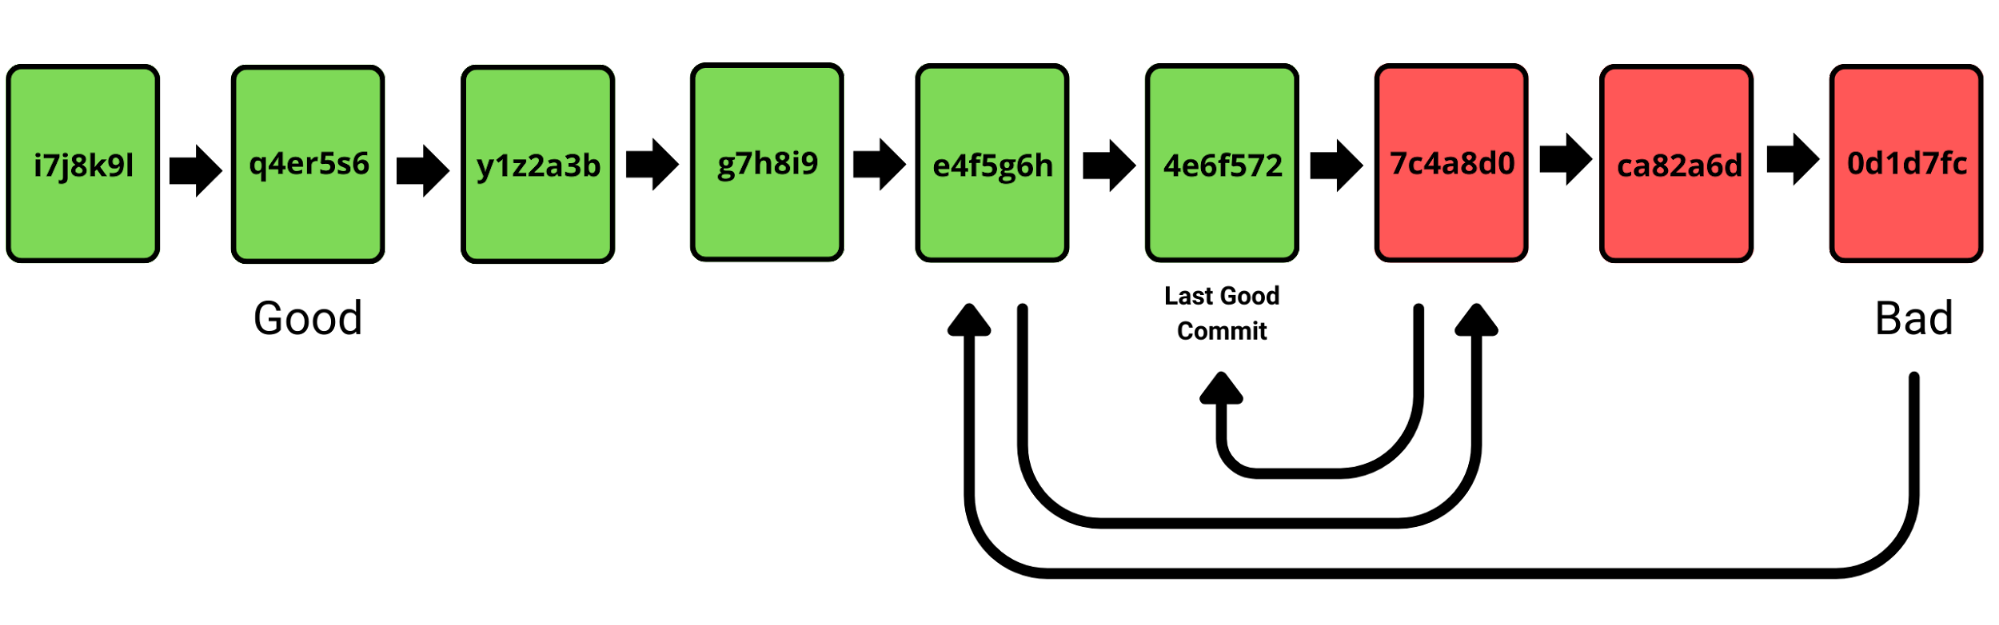 Git bisect example diagram